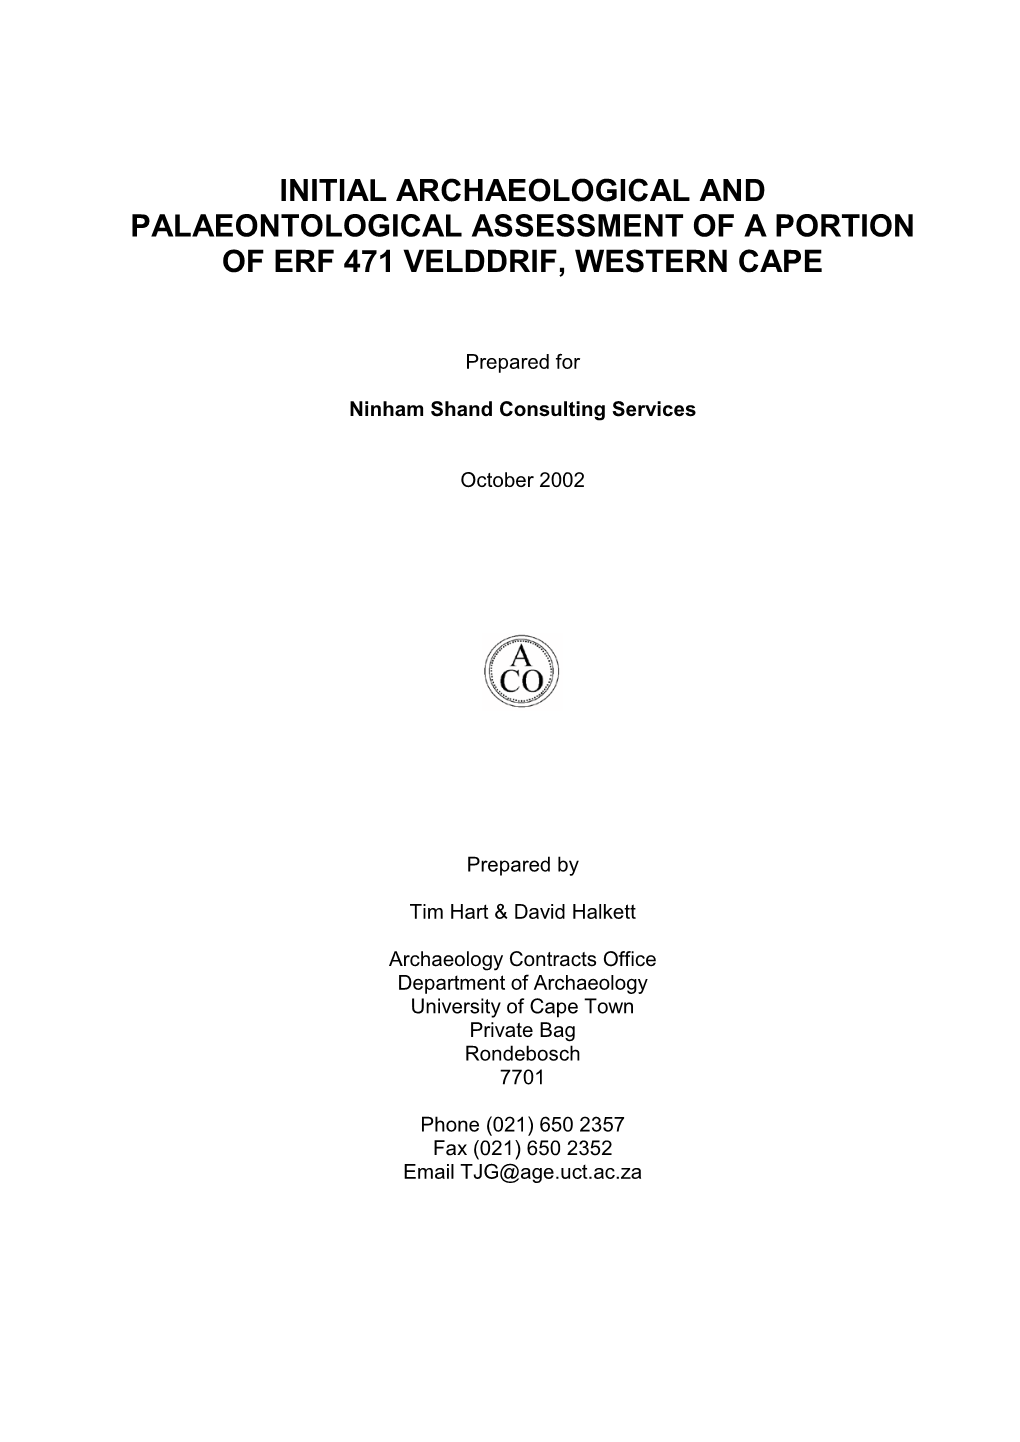 Initial Archaeological and Palaeontological Assessment of a Portion of Erf 471 Velddrif, Western Cape